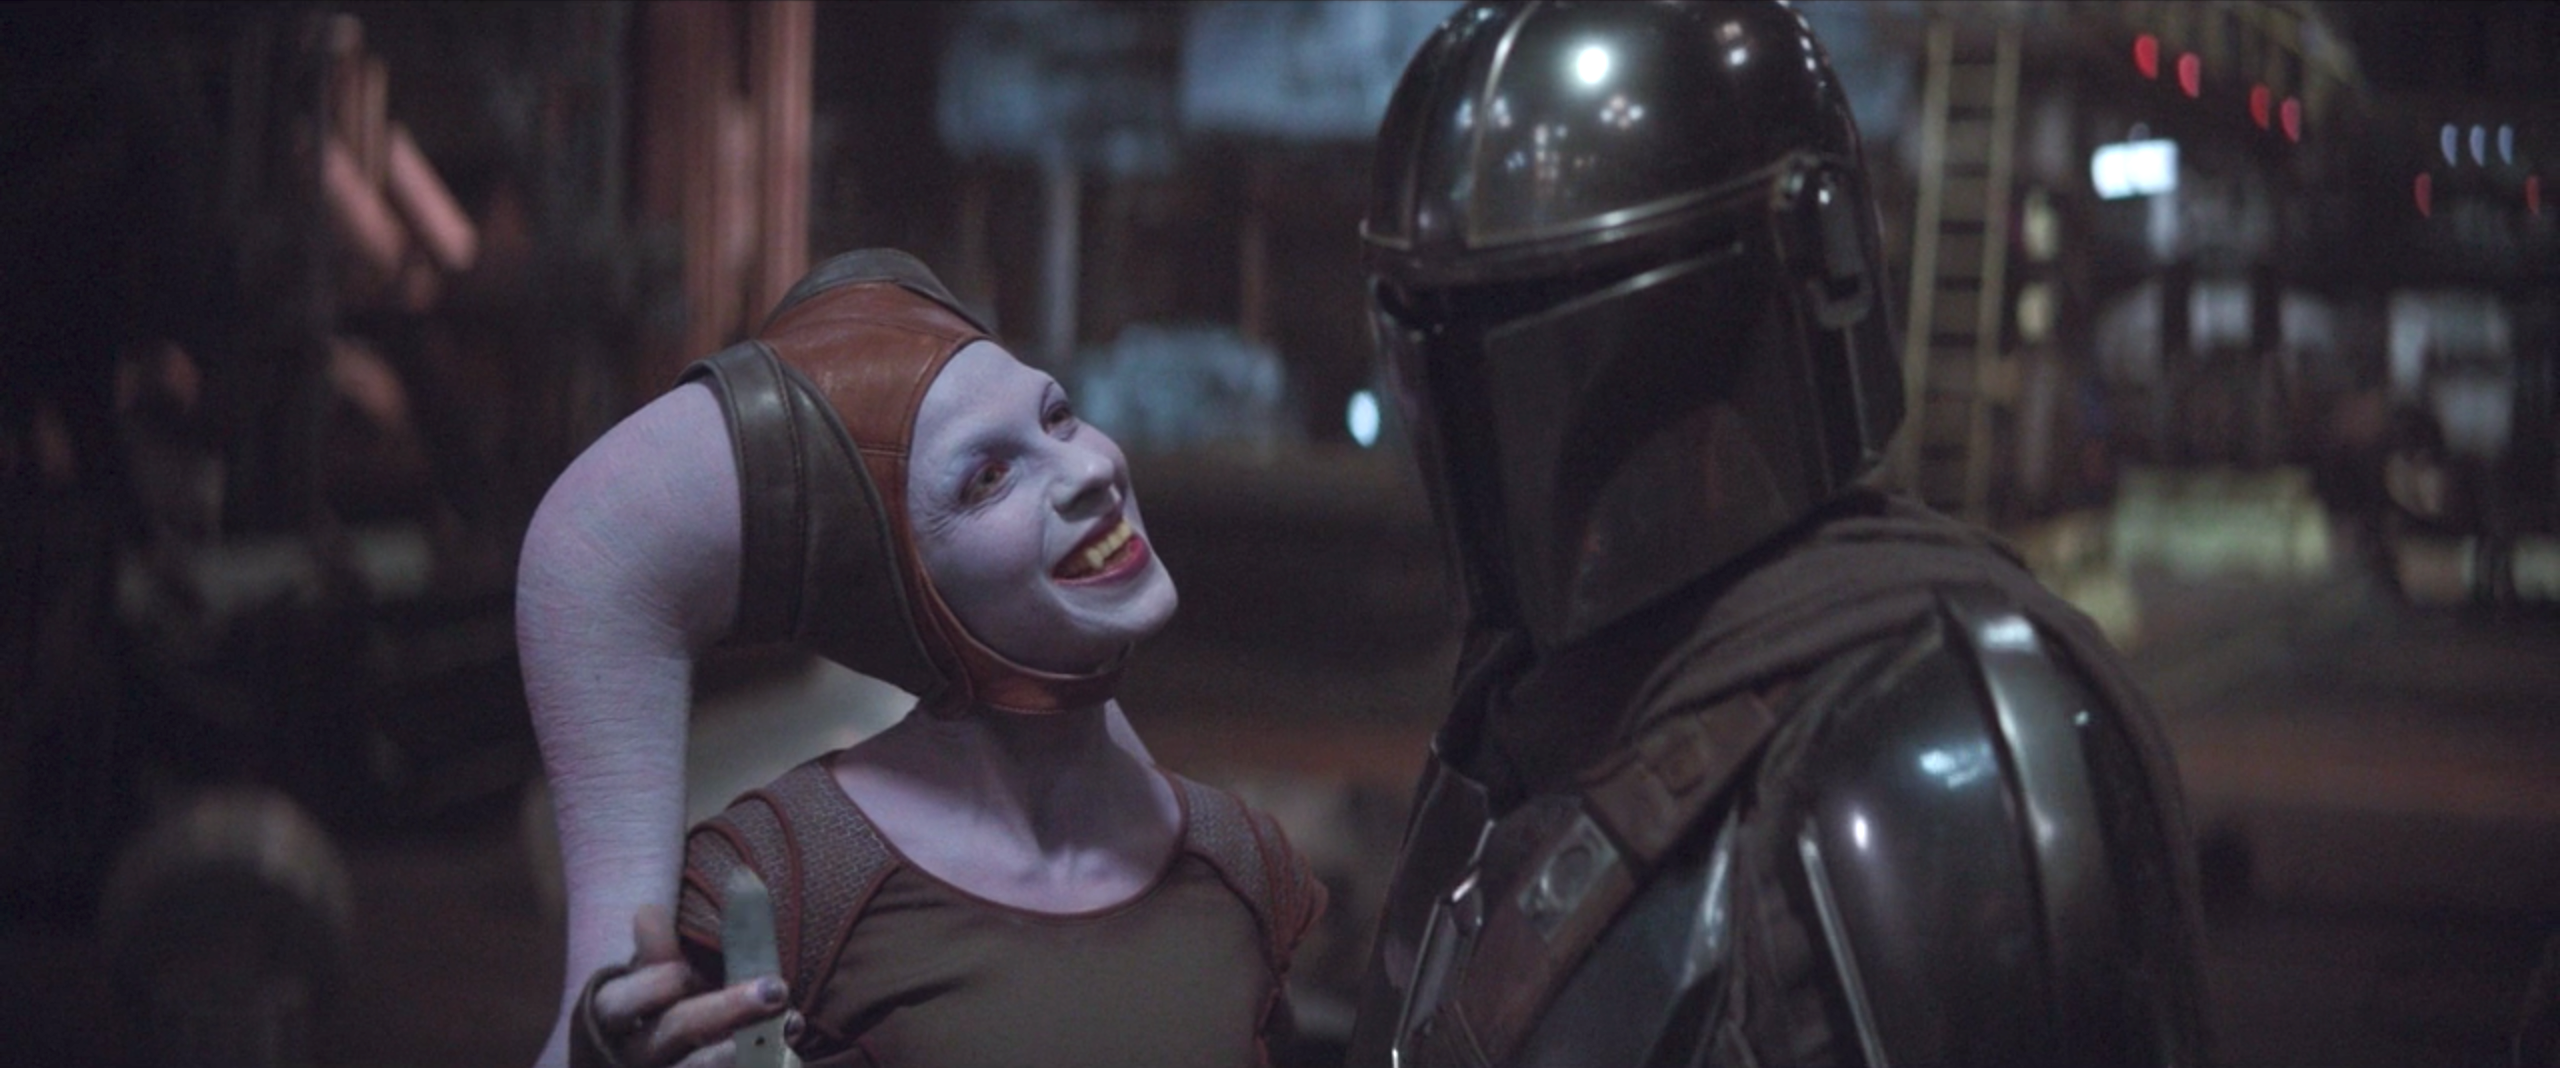 The Mandalorian Suggested Mando Has Sex With His Helmet On